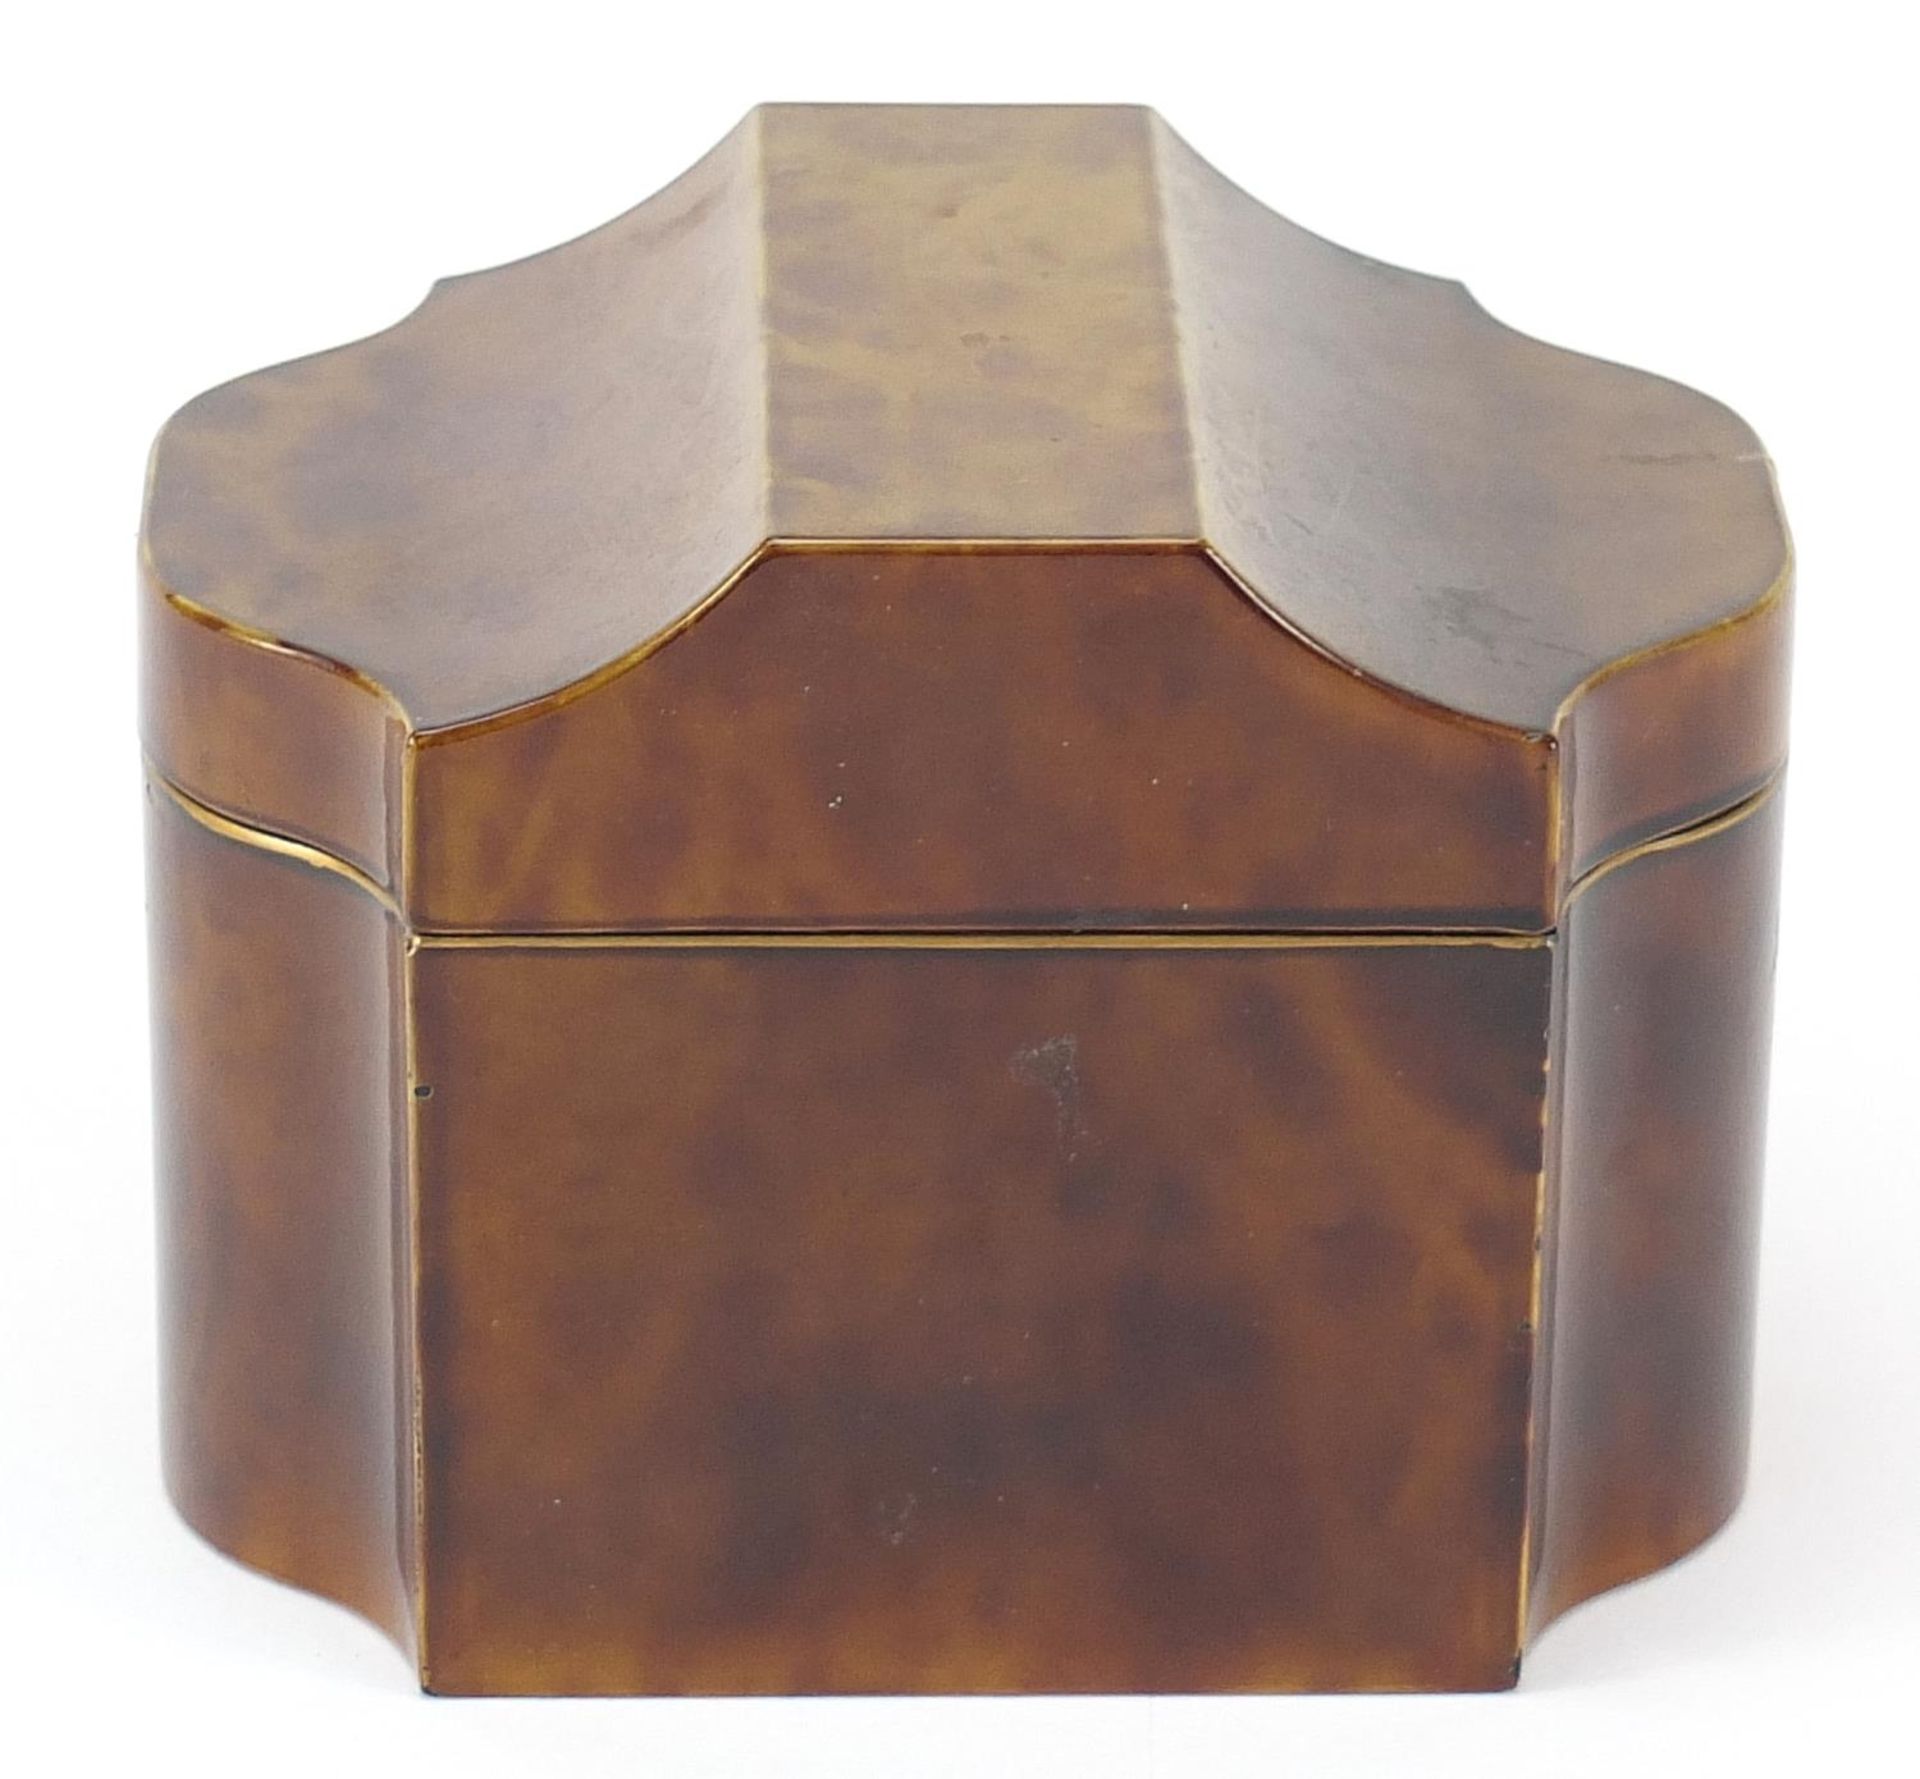 Faux tortoiseshell box and cover, 9cm H x 12cm W x 9cm D - Image 3 of 4